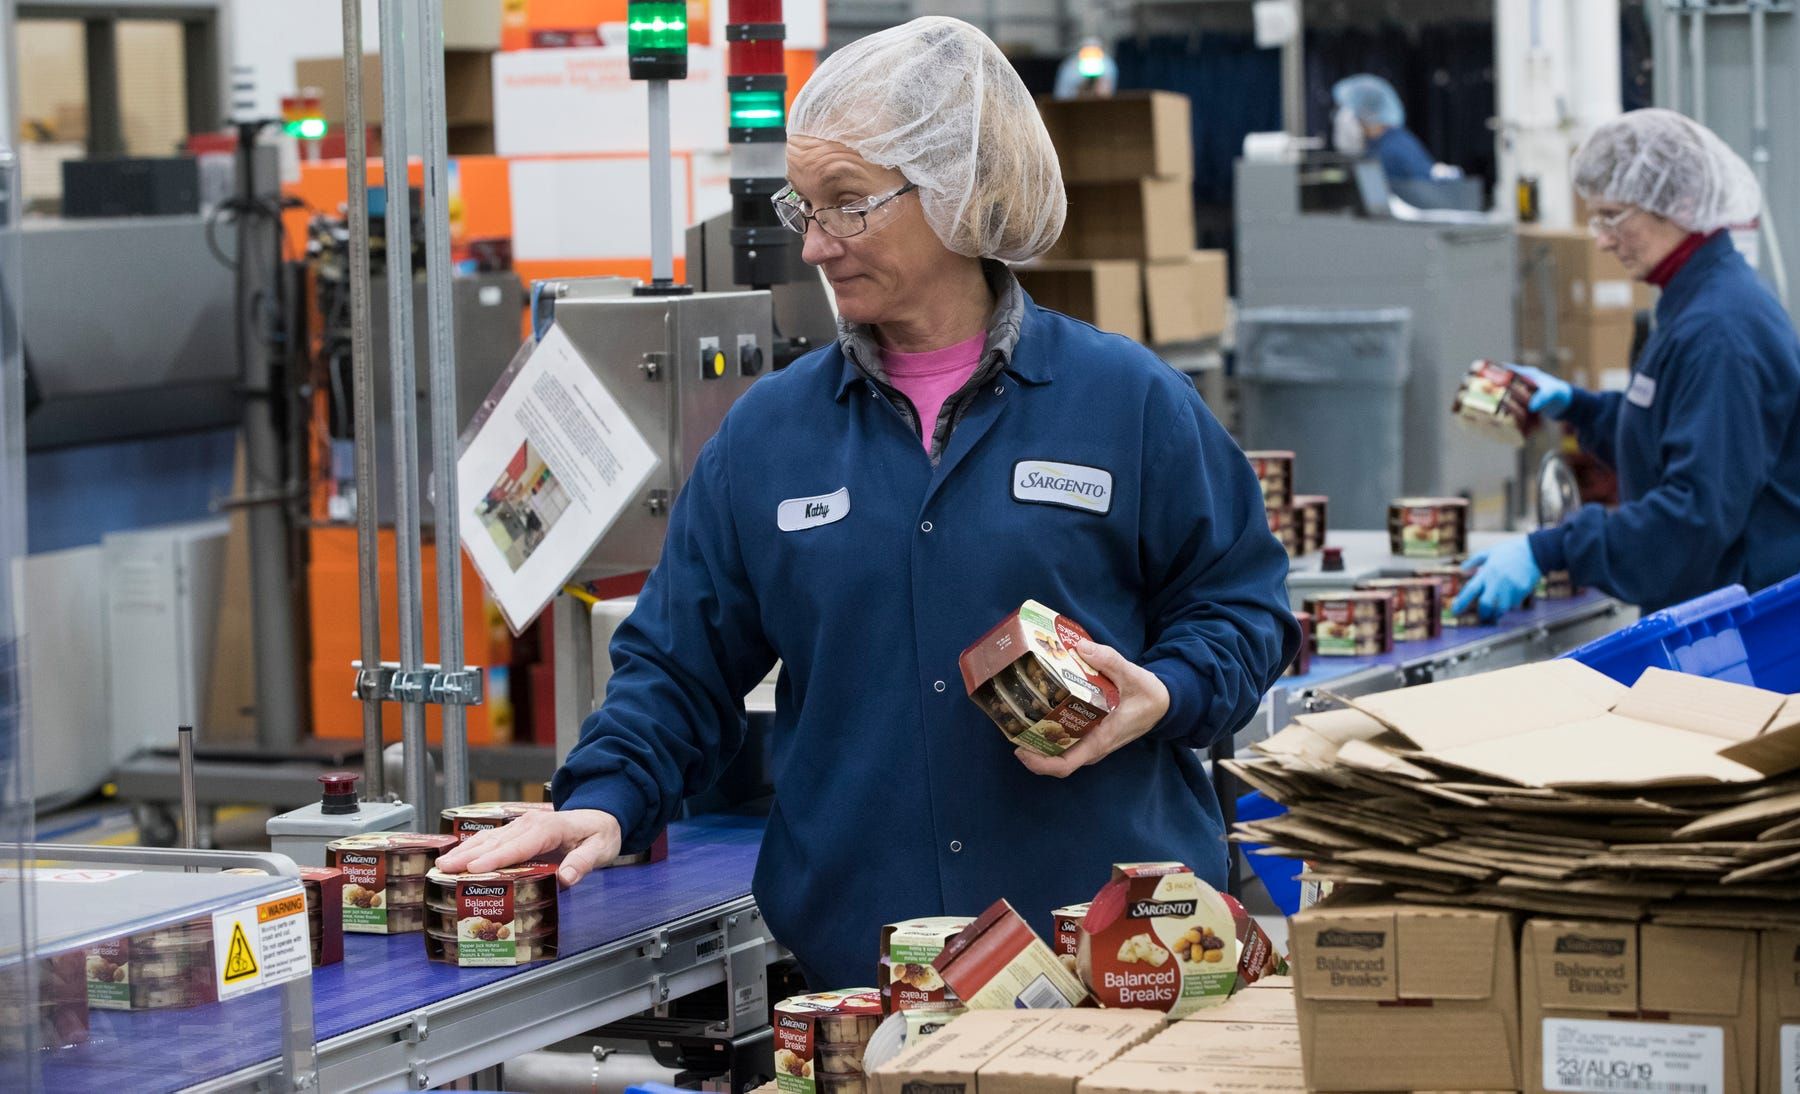 Kathy Griffey, top, and Kristin Geary, bottom right, work on an assembly line packaging Balanced Breaks snacks at Sargento Foods Inc. The company employs about 2,300 people in Wisconsin. Image Courtesy of Mark Hoffman. United States, 2019.